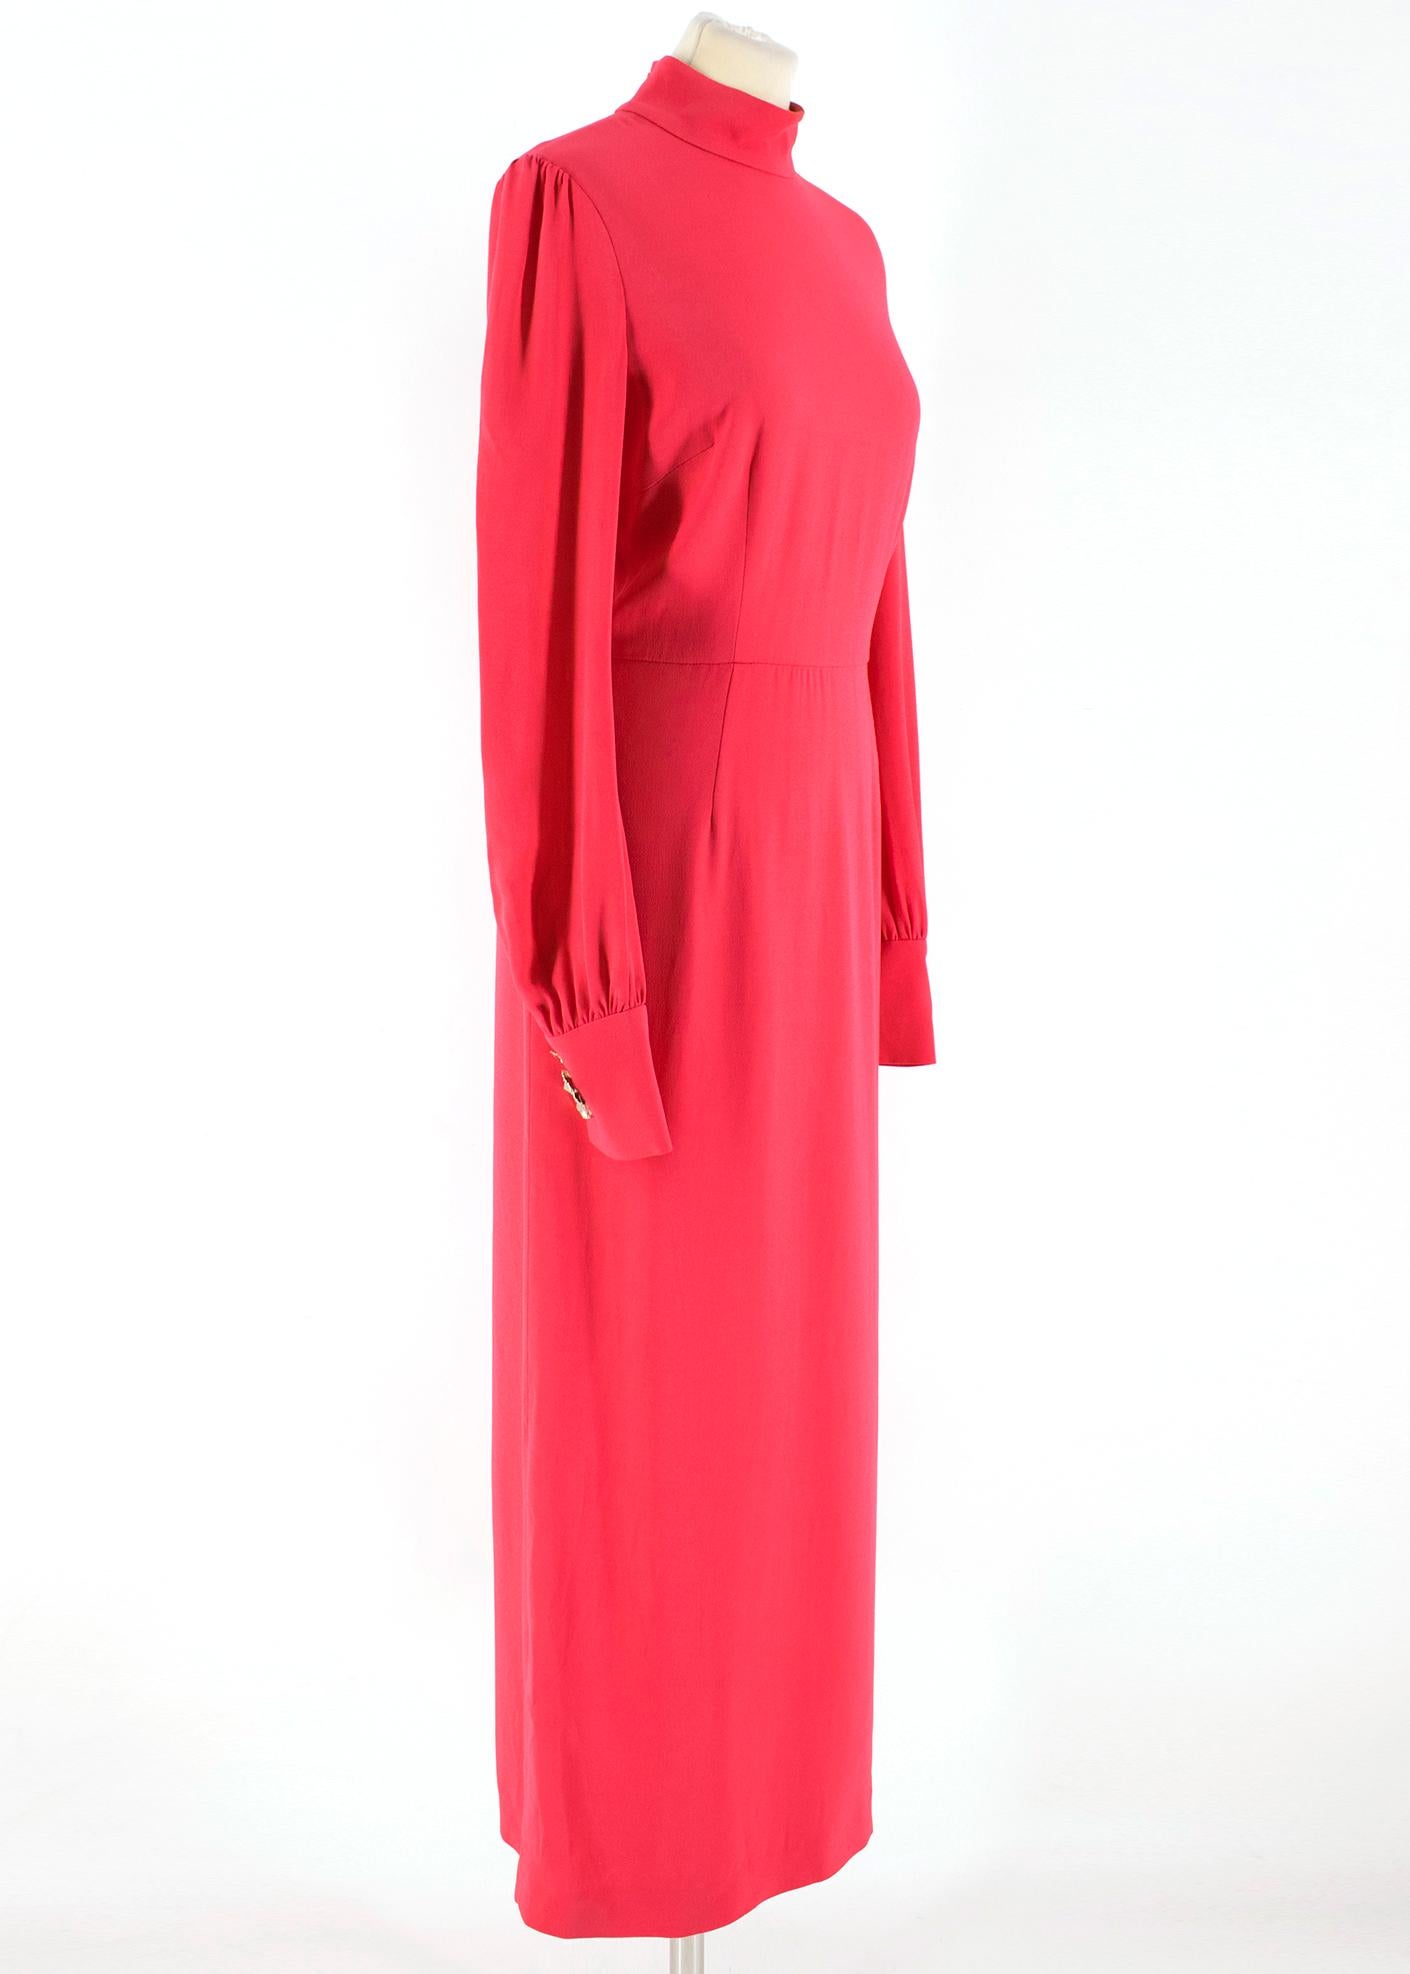 Giles Deacon Pink High-neck Embellished Cuff Maxi Dress

- High neck
- Long sleeves with peppered cuffs and gold-tone metal flower embellishment
- Concealed rear zip fastening and popper detail with a large facetted silver-tone metal button
- Fitted